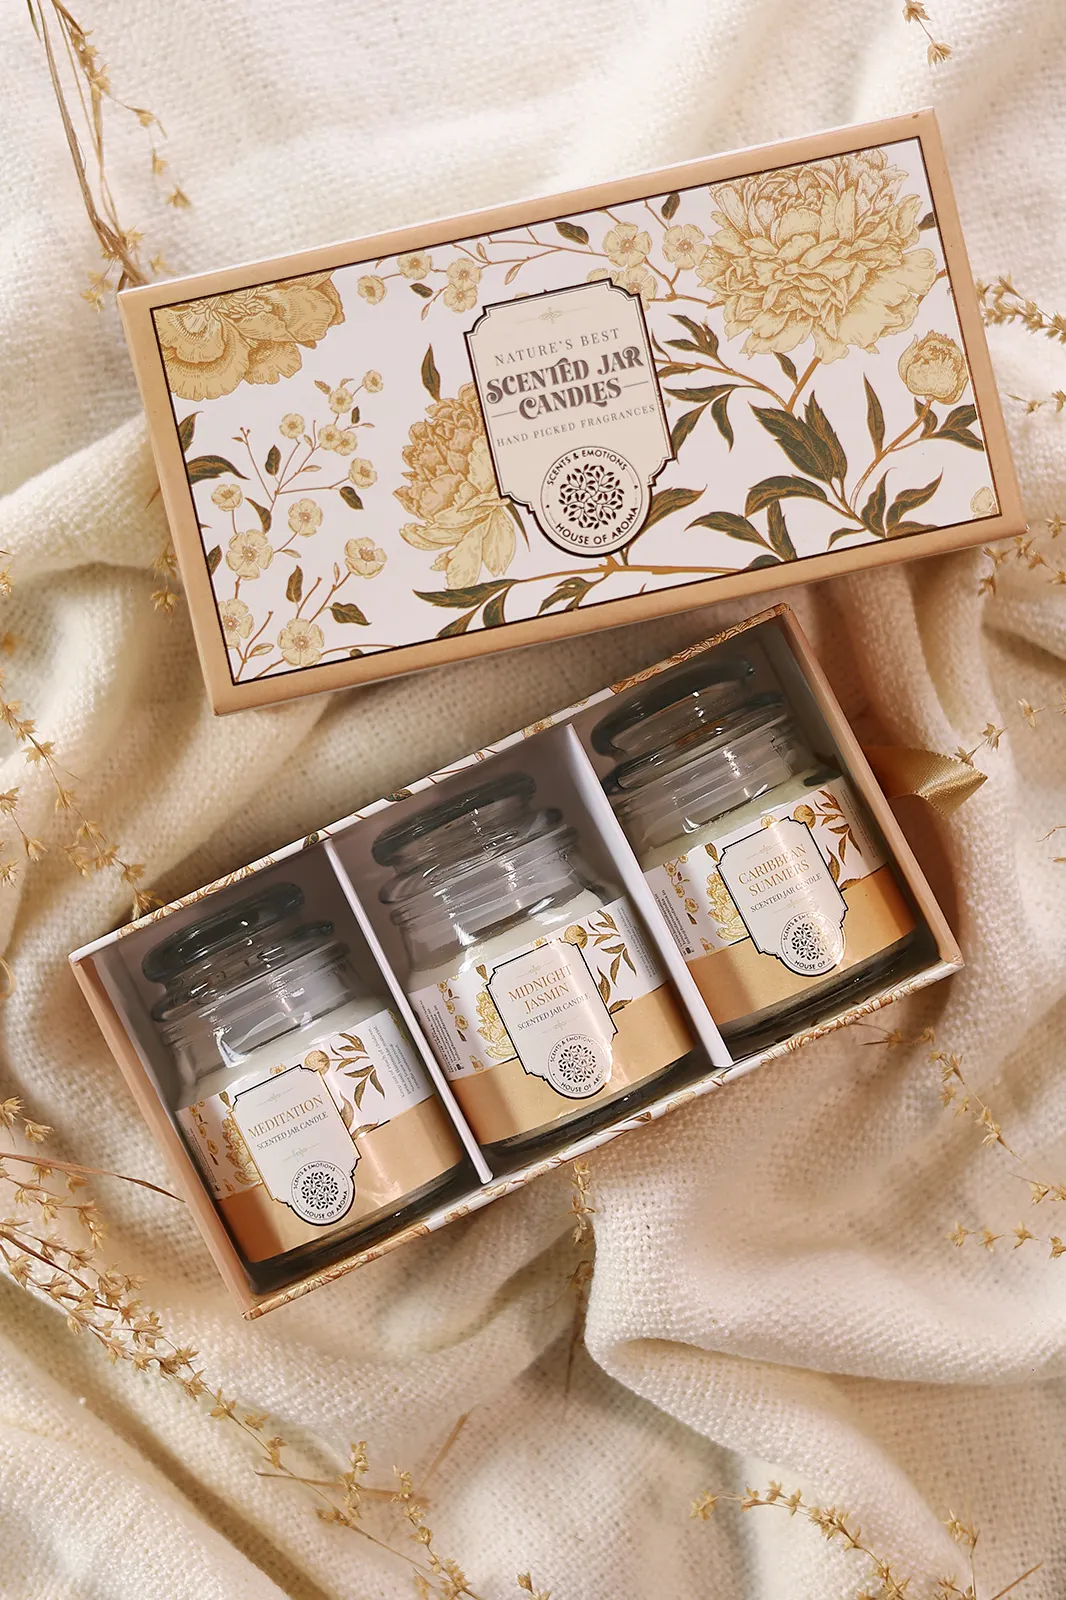 scented candle gift set combo pack, fragrance candle gift set, candle gift set online, luxury candle gift set, scented candle set, combo pack, scented candle online, gift set for women, festival gift set, gift for girls, gift to man, anniversary gift, Diwali candle gift set, fragrance gifts, candle gifts for Christmas, house of aroma